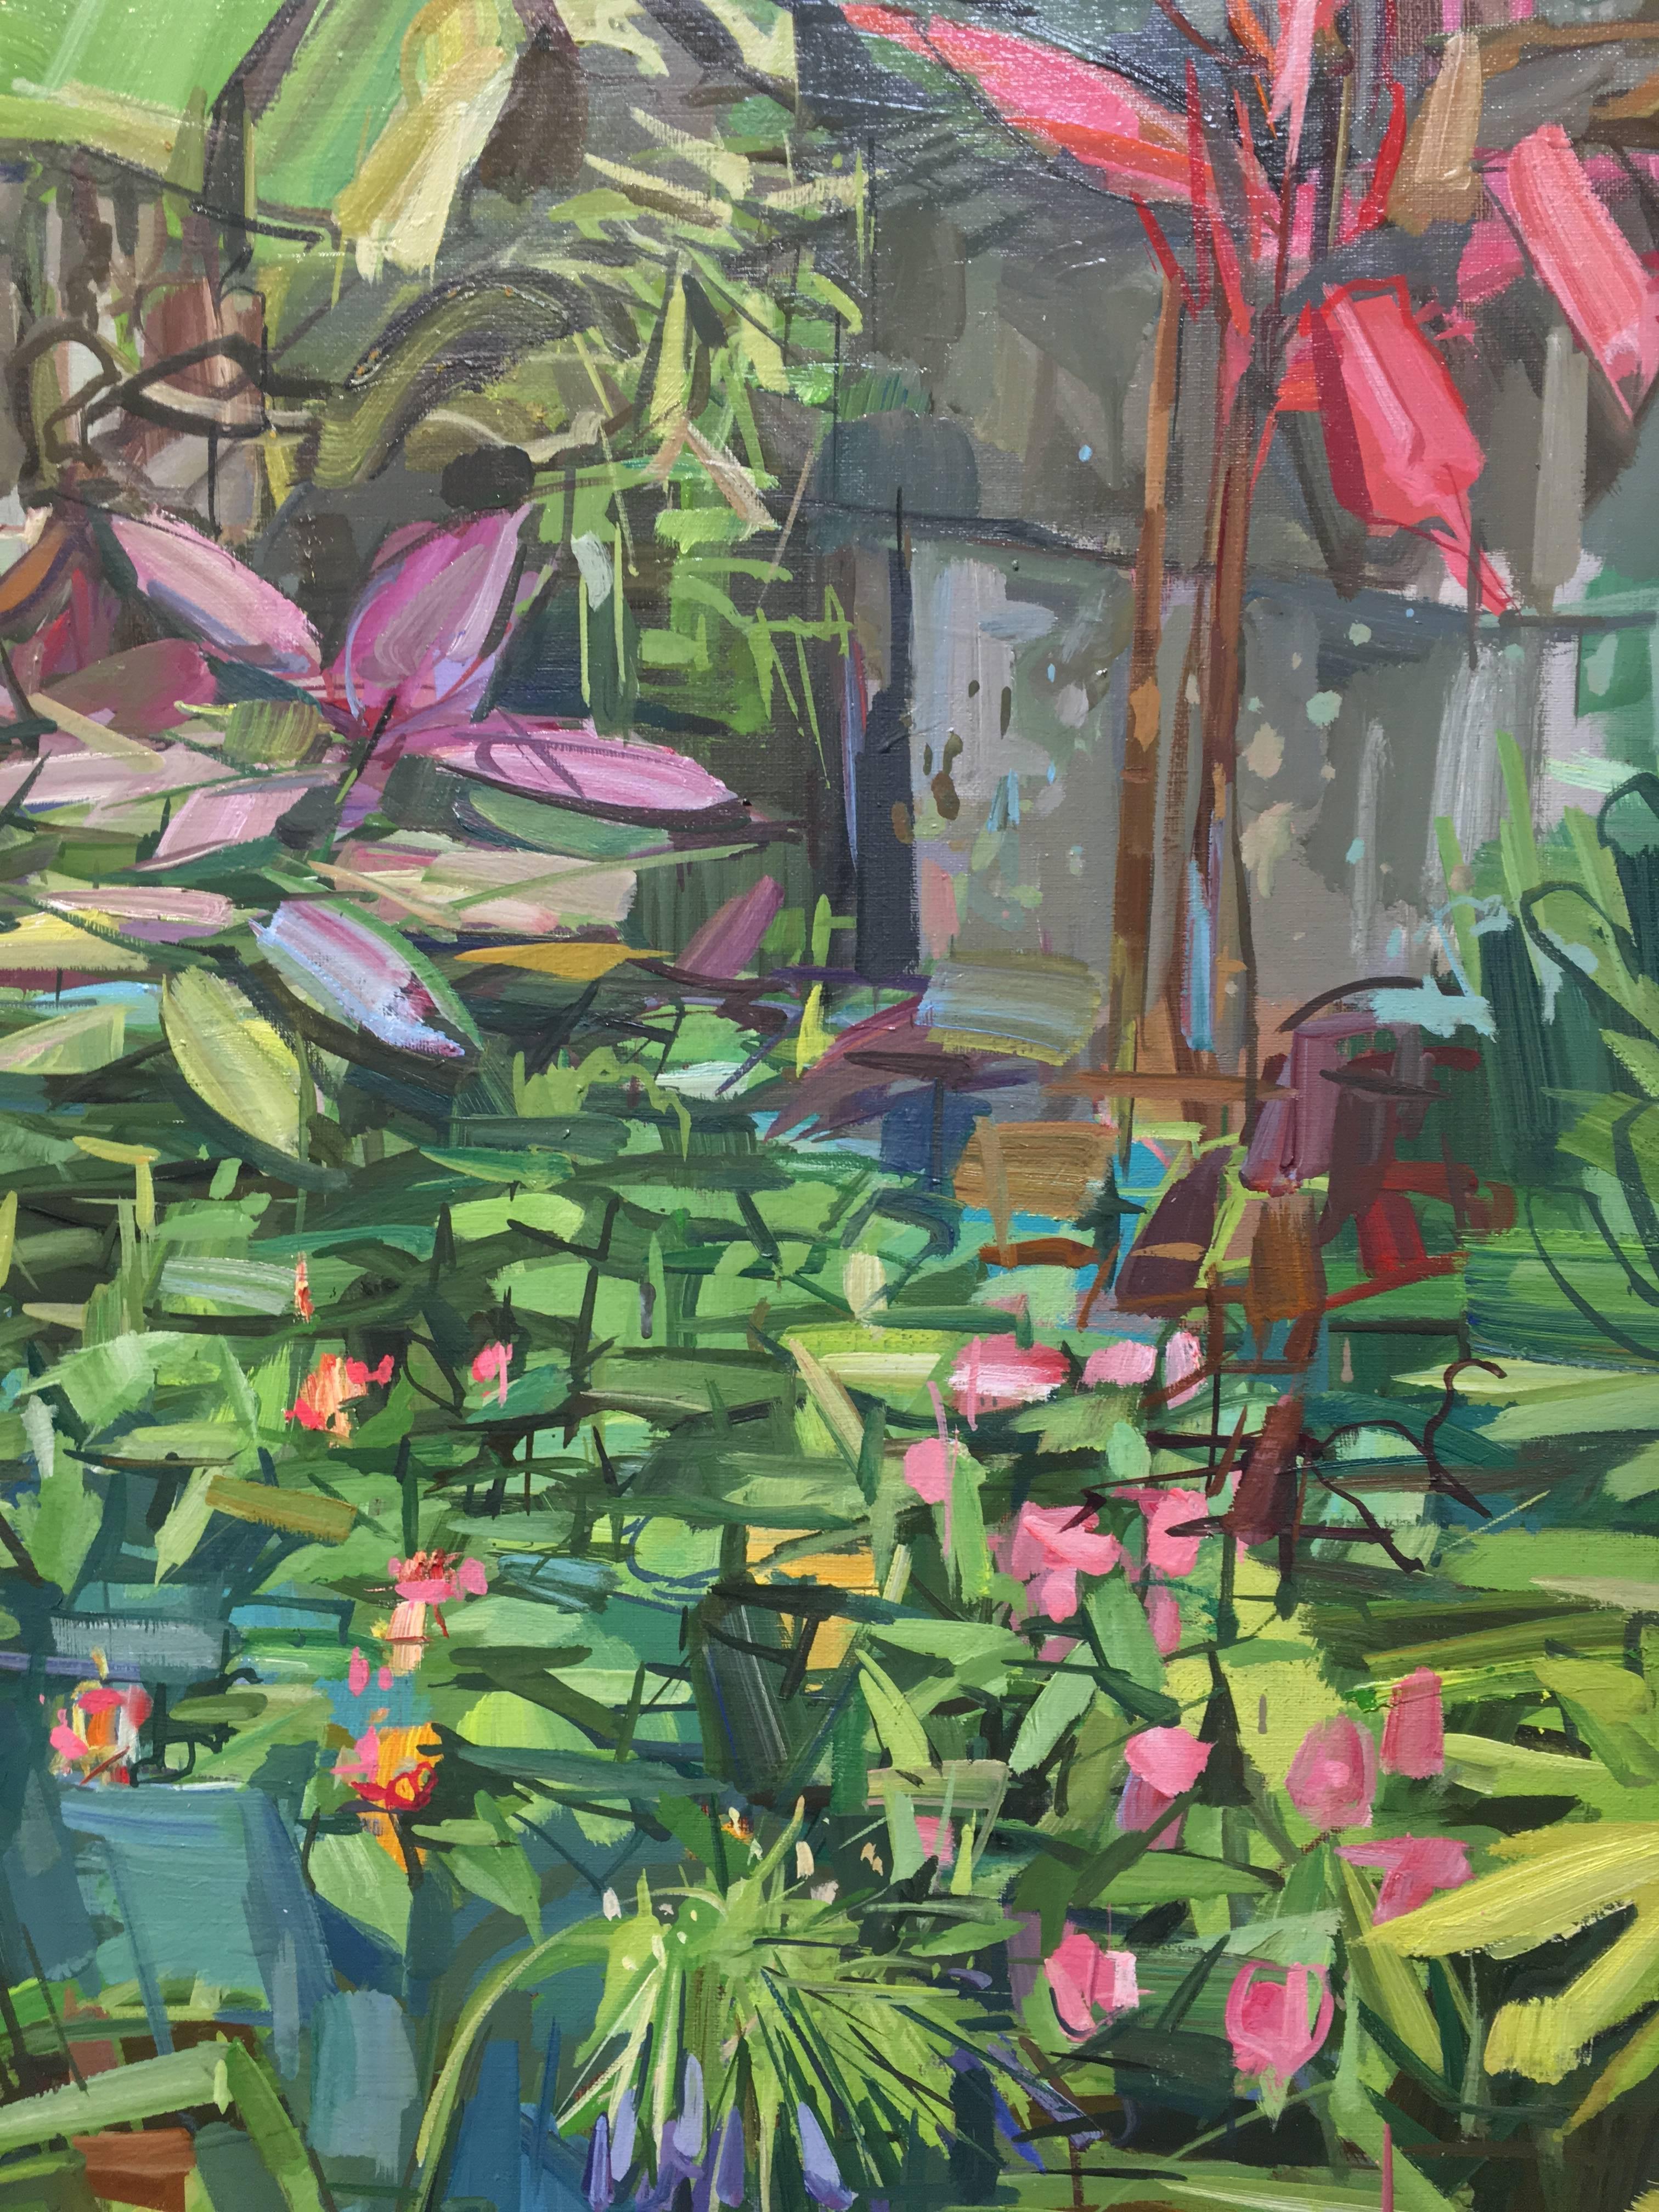 This colorful painting of plants and flowers in a backyard is from Francis Sills' 2017 series of Flora Paintings. The verdant shades of green are punctuated by the warmer tones of the blossoms and the red plant in the corner. The vivid hues of this